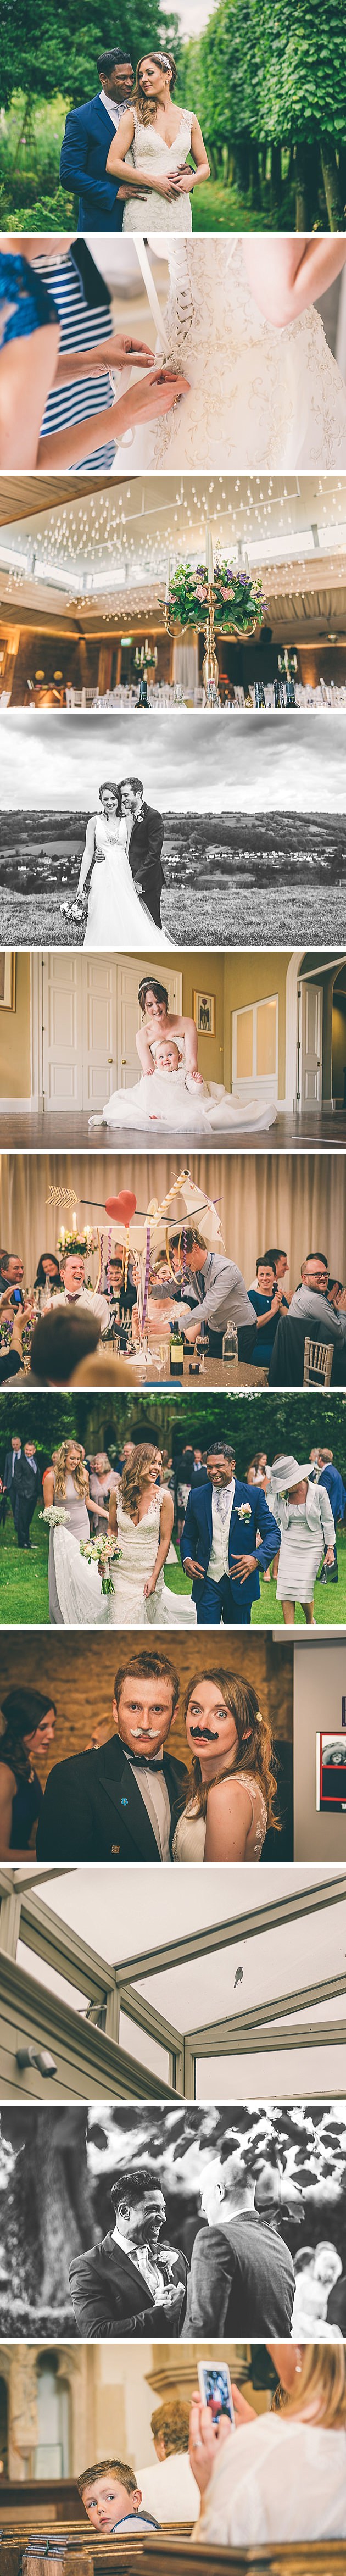 Guests laughing during wedding reception